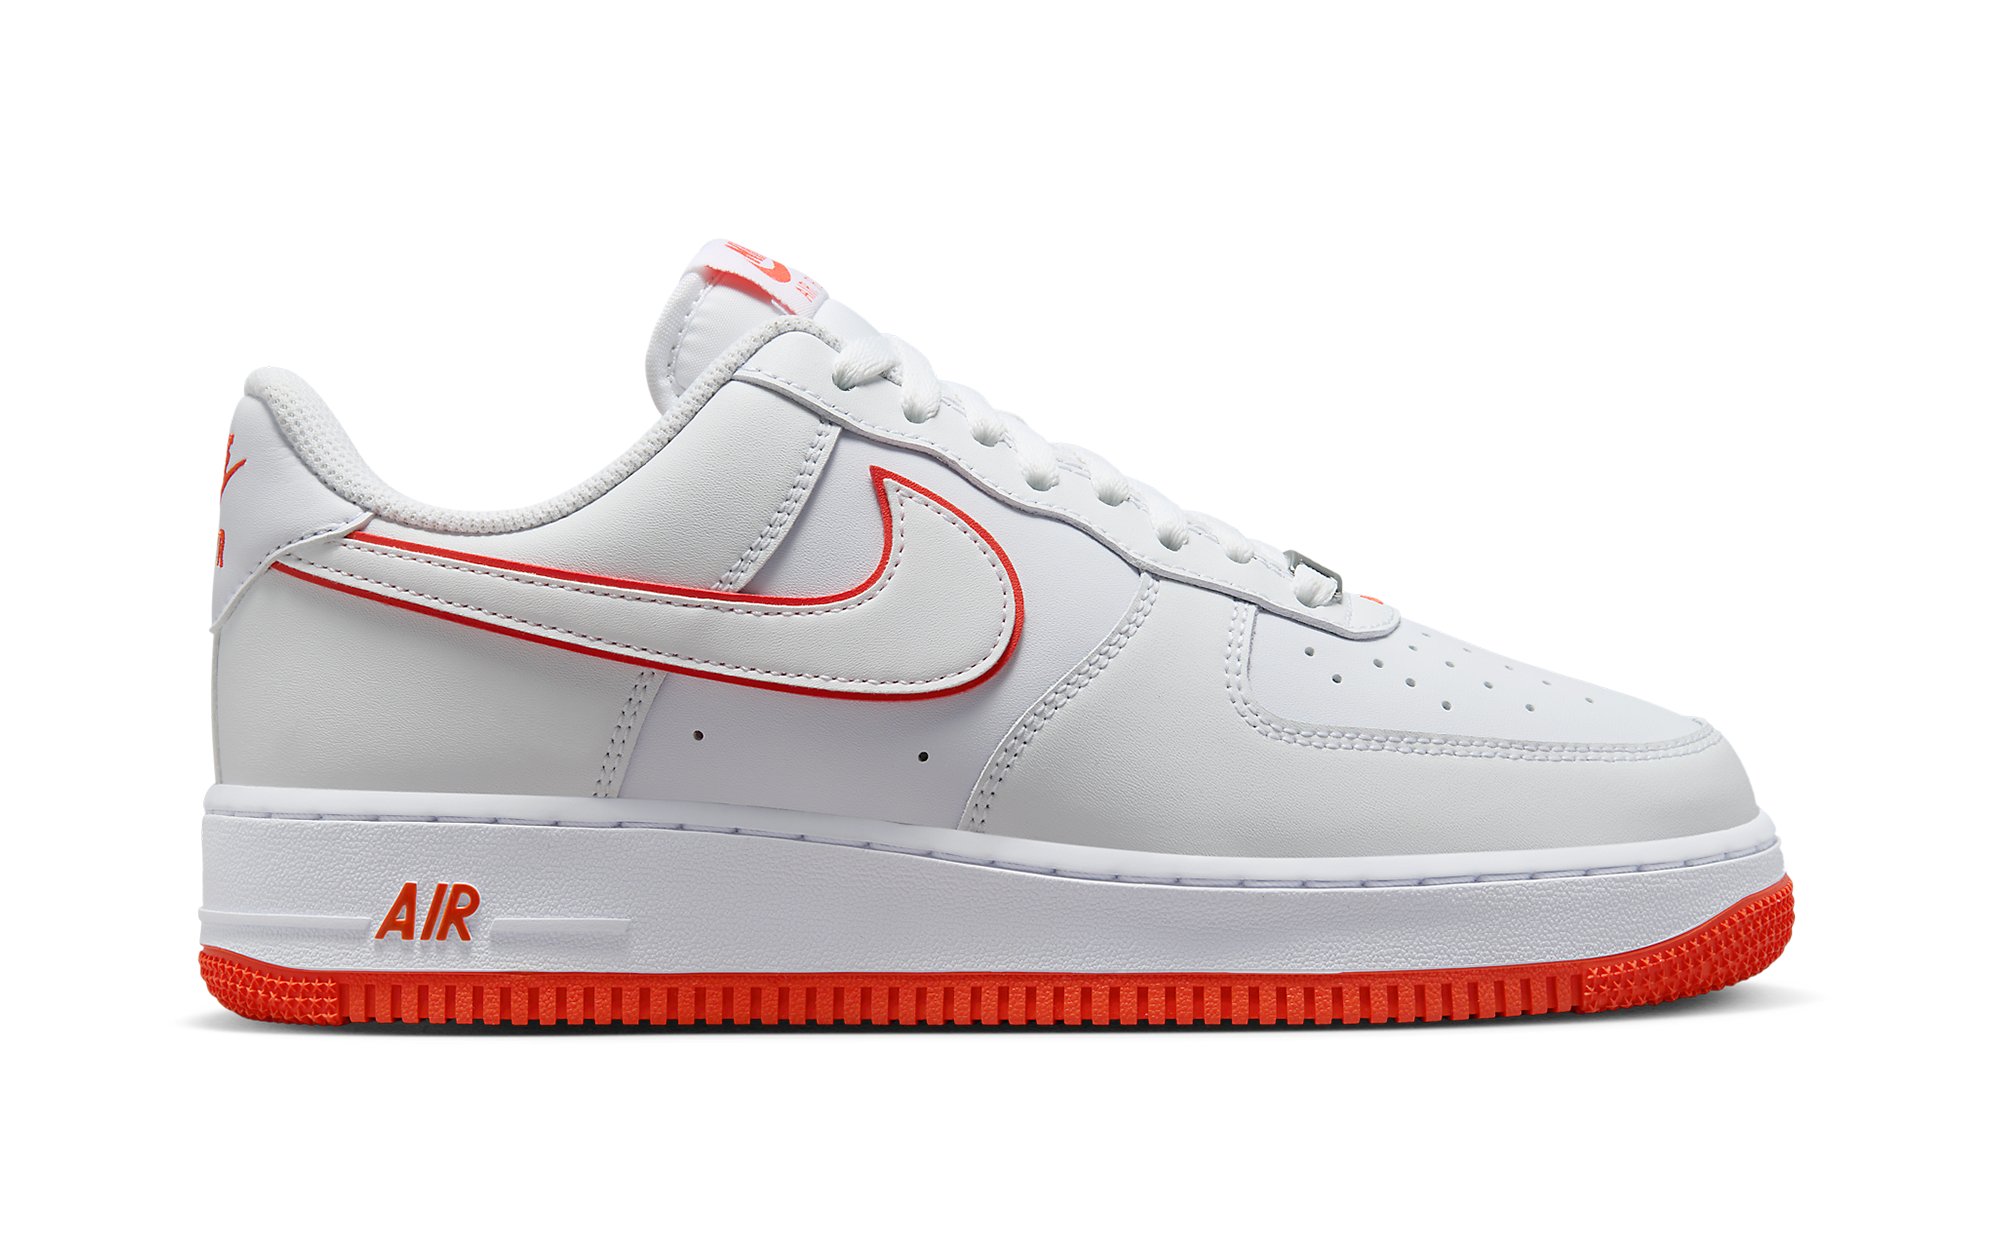 Picante Red Gradient Swooshes Animate This Simple Nike Air Force 1 Low 